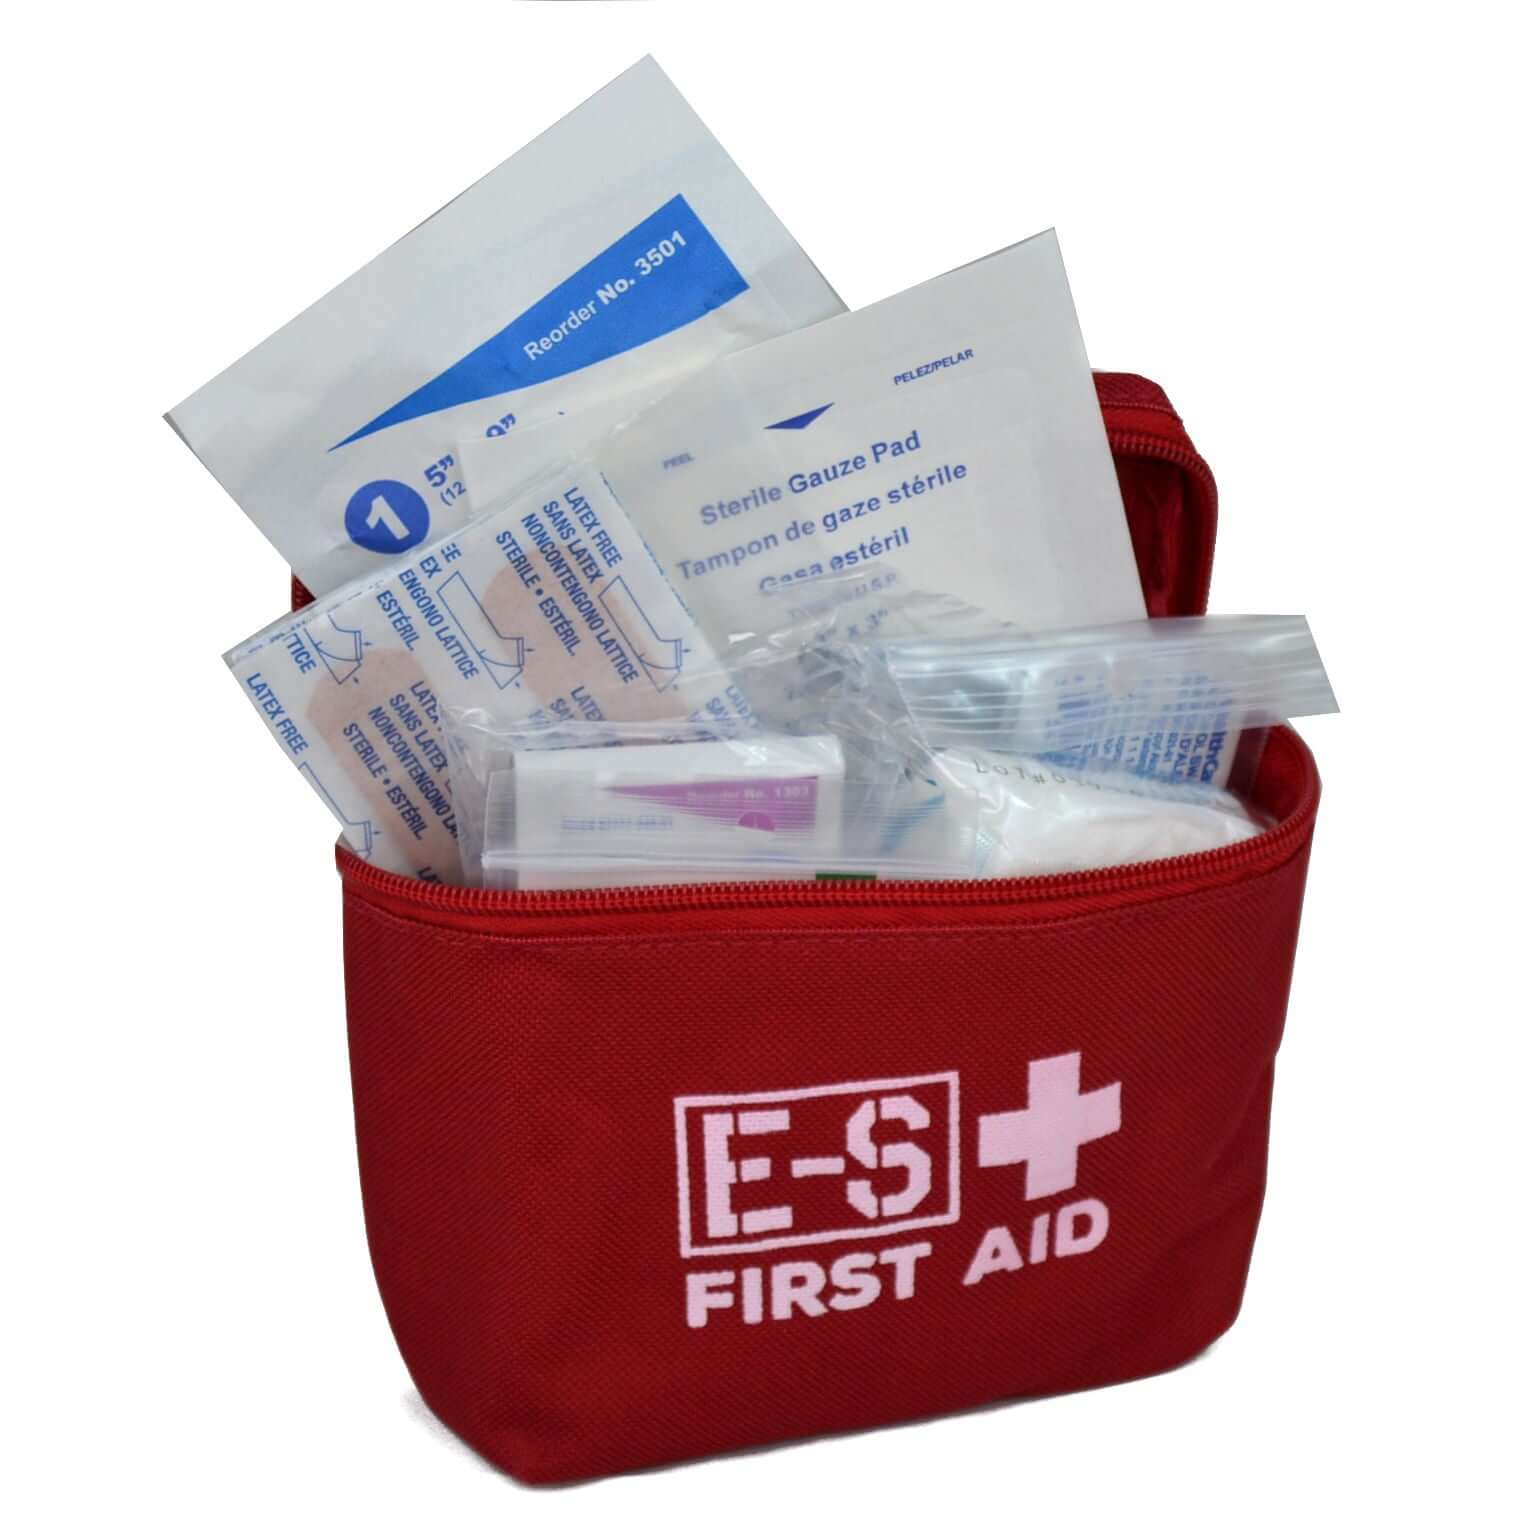 Echo-Sigma Compact First Aid Kit